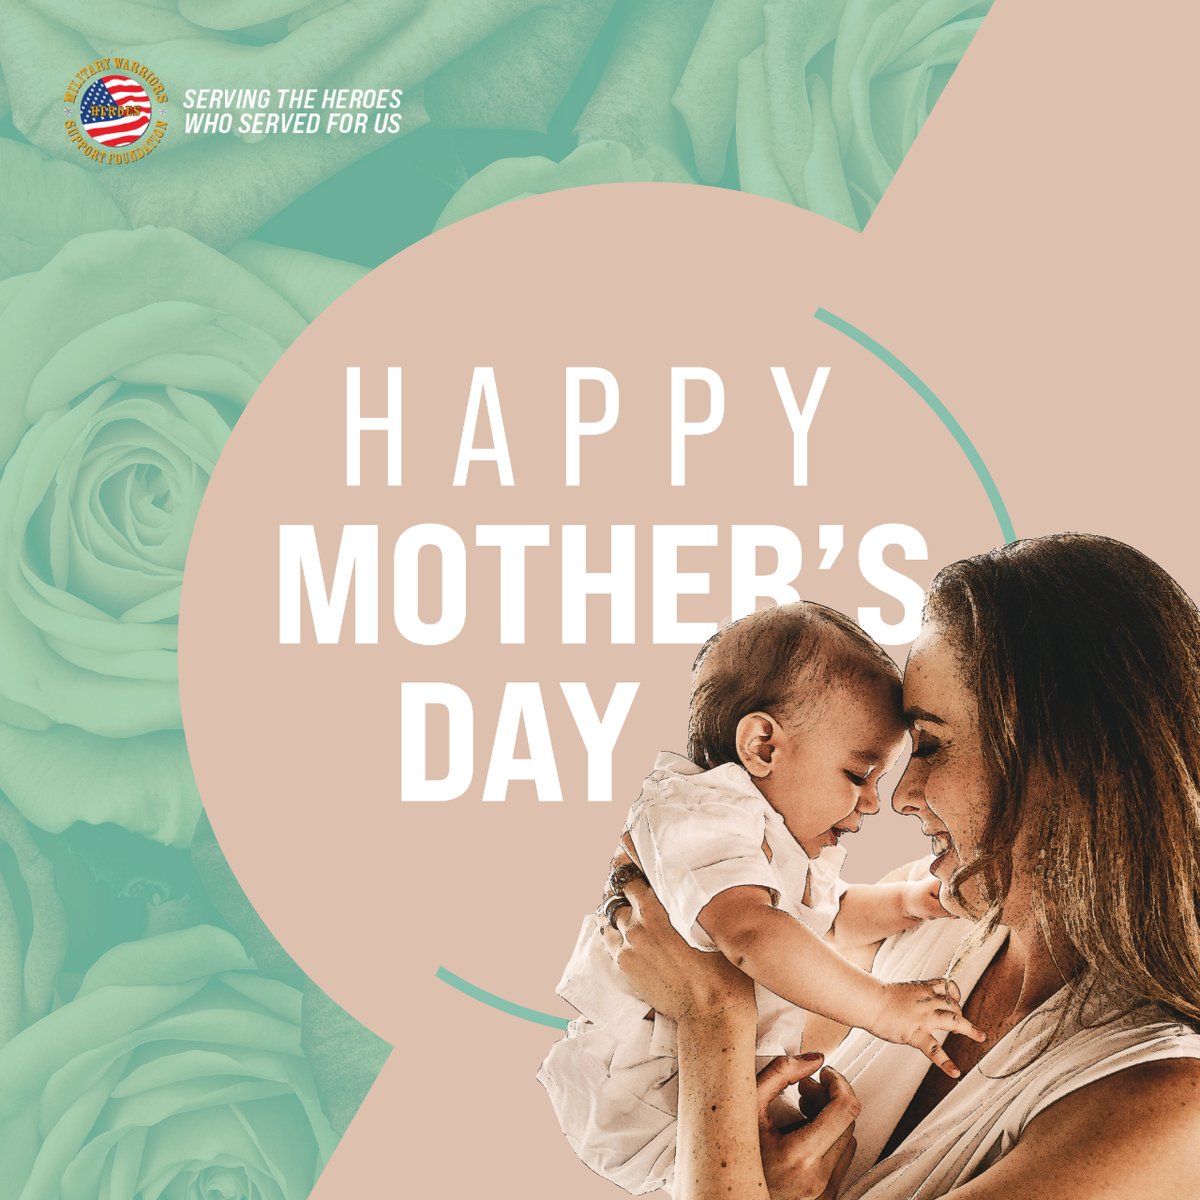 🌺 Happy Mother's Day!  Today, we salute to the courageous military moms who not only serve our country but also nurture and support their families.  From all of us at Military Warriors Support Foundation, Happy Mother's Day! #MothersDay #MilitaryMoms #SupportOurTroops